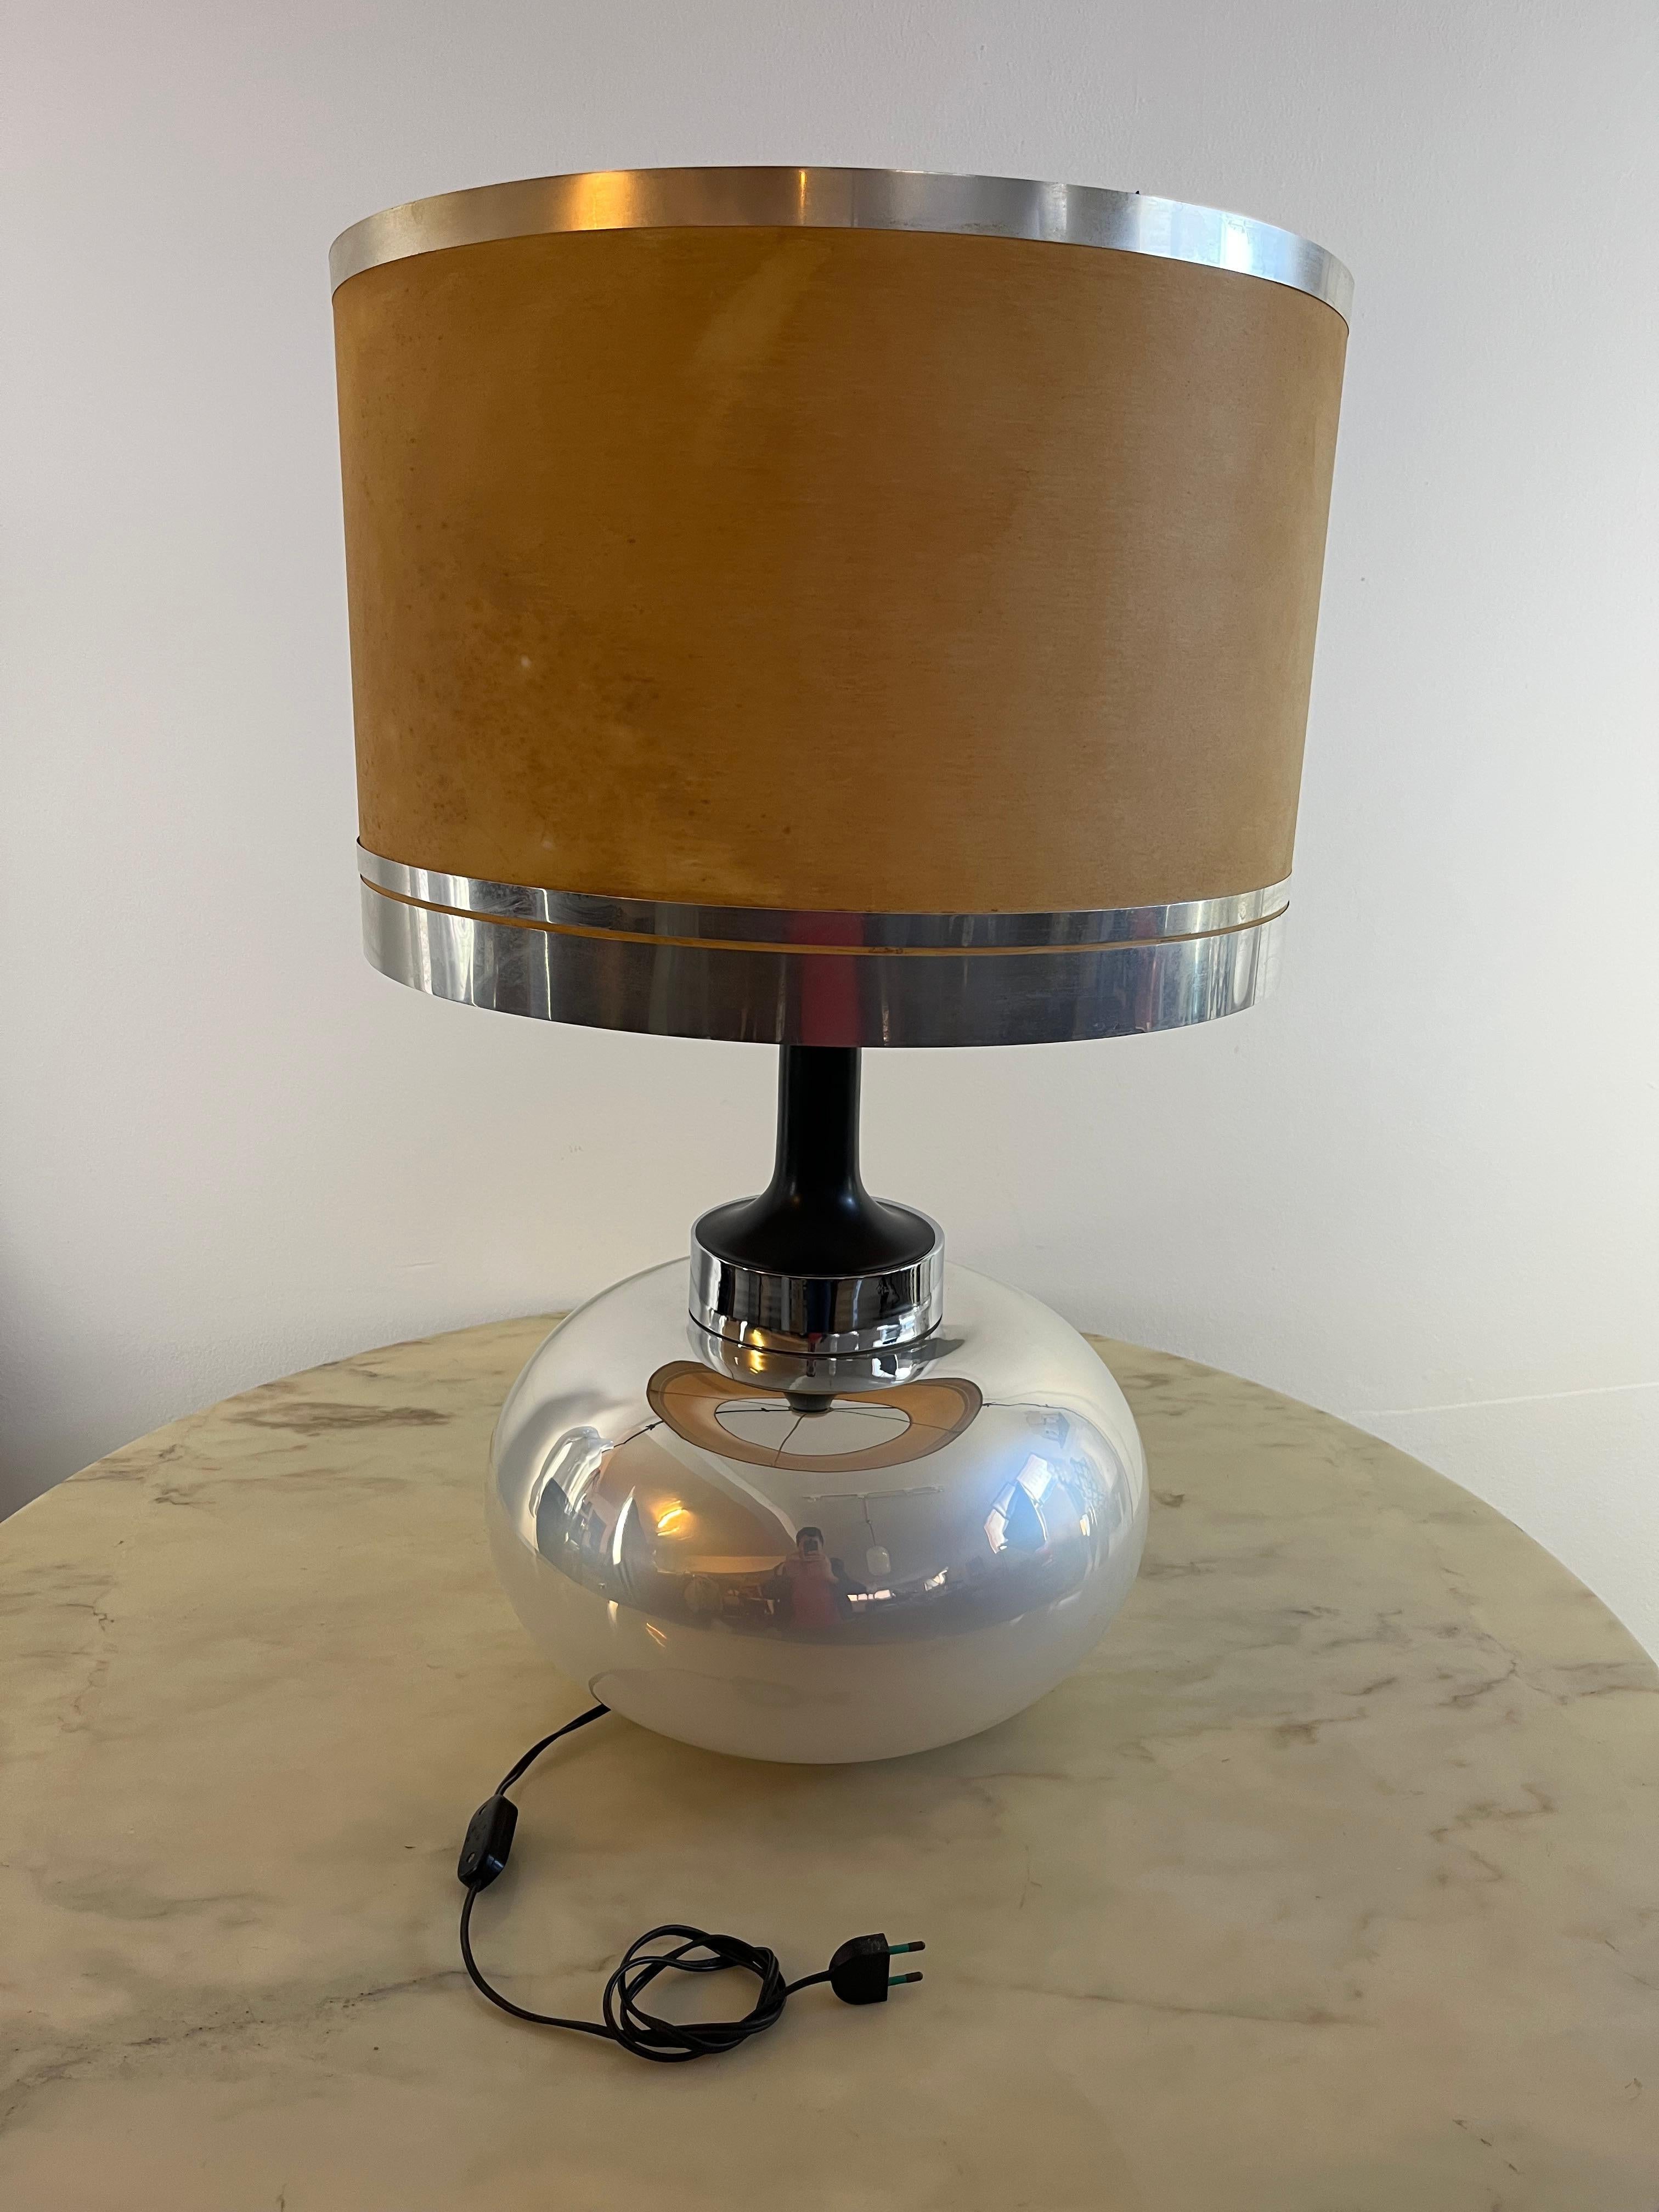 Large table lamp in opal glass. Italian production, 1970s. The lamp is in very good condition and shows only small signs of wear. The lampshade has stains and halos. The lamp alone is 55 cm high, it becomes 80 cm with the lampshade.